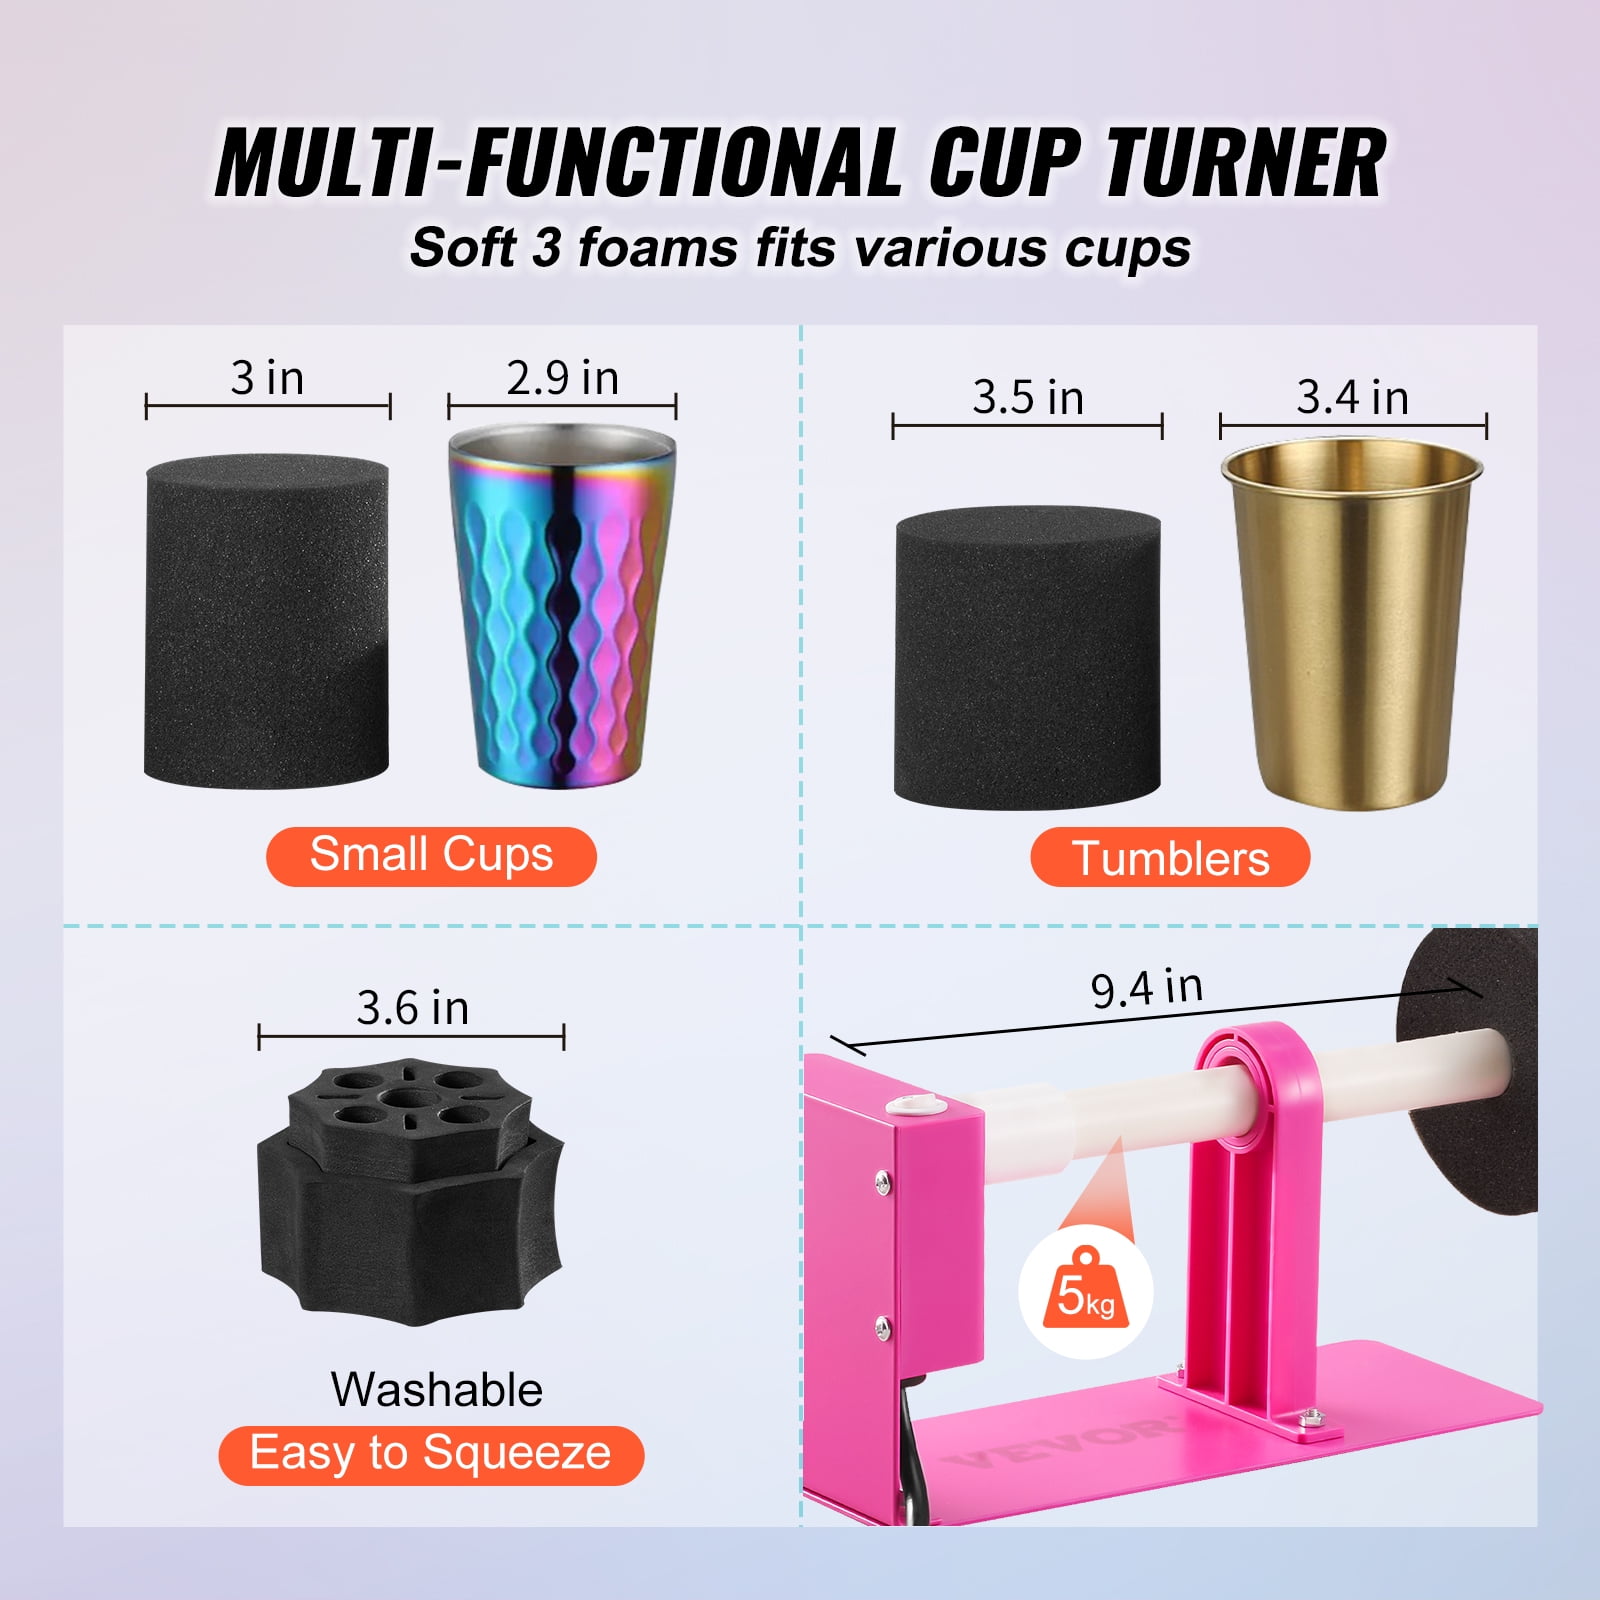 Cup Turner Spinner Kit Cuptisserie Tumbler Turner Machine Cup Rotator for  Epoxy Crafts Tumbler EU Plug - Price history & Review, AliExpress Seller -  Joanna's Tool Store